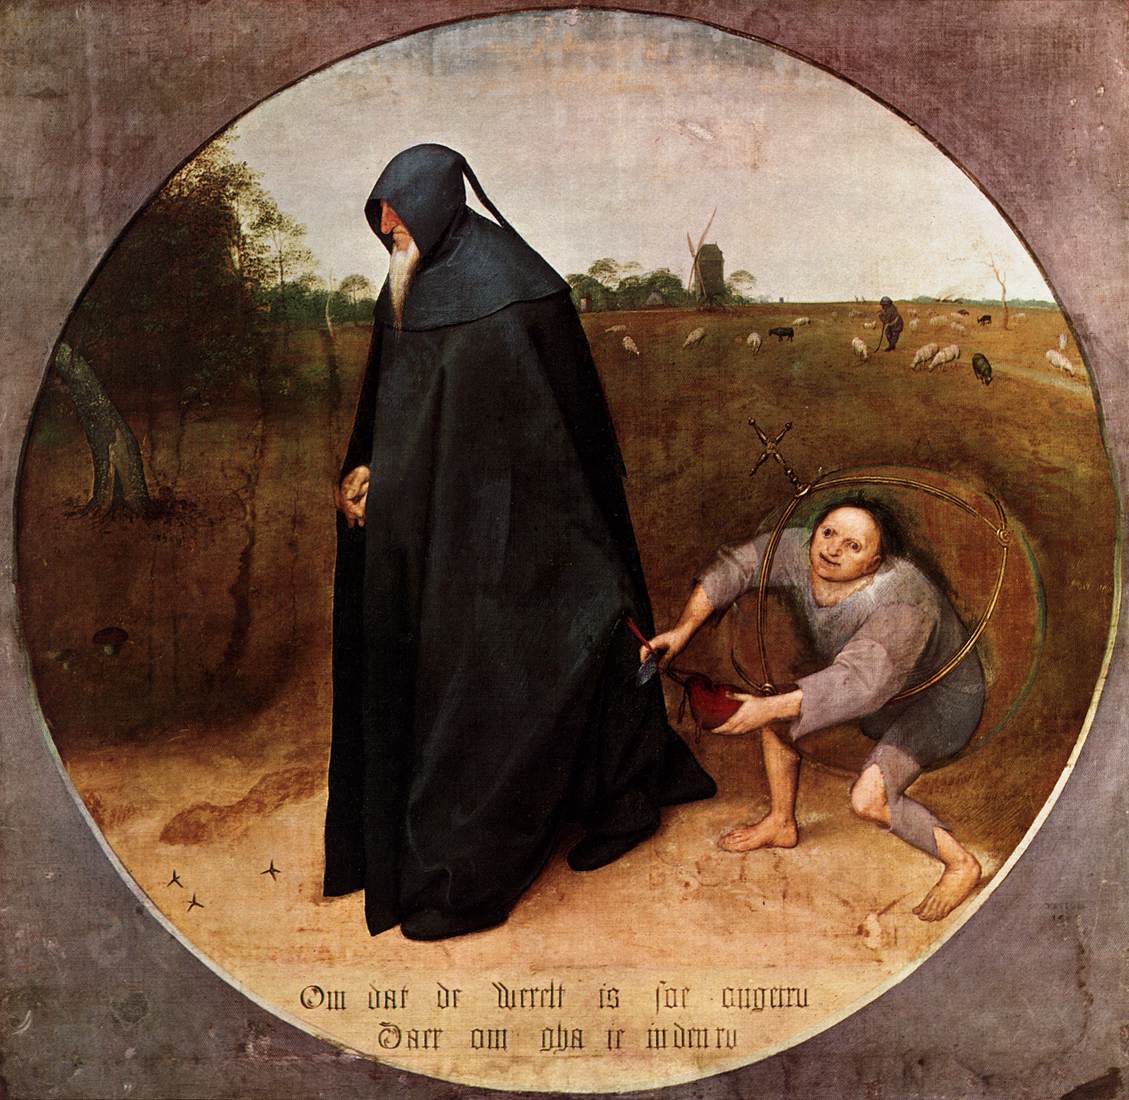 Bruegel.1568.''The Dutch inscription reads: 'Because the world is perfidious, I am going into mourning'. The moral of the painting is that such a relinquishment of the world is not possible: one must face up to the world's difficulties, not abandon responsibility for them. The hooded misanthrope is being robbed by the small figure in a glass ball, a symbol of vanity. His action shows how impossible it is to give up the world. The misanthrope is also walking unawares towards the mantraps set for him by the world. He cannot renounce it as he would wish, and he is contrasted with the shepherd in the background who guards his sheep and who is more virtuous than the misanthrope because of his simple, honourable performance of his duties, his sense of responsibility towards his charges.''